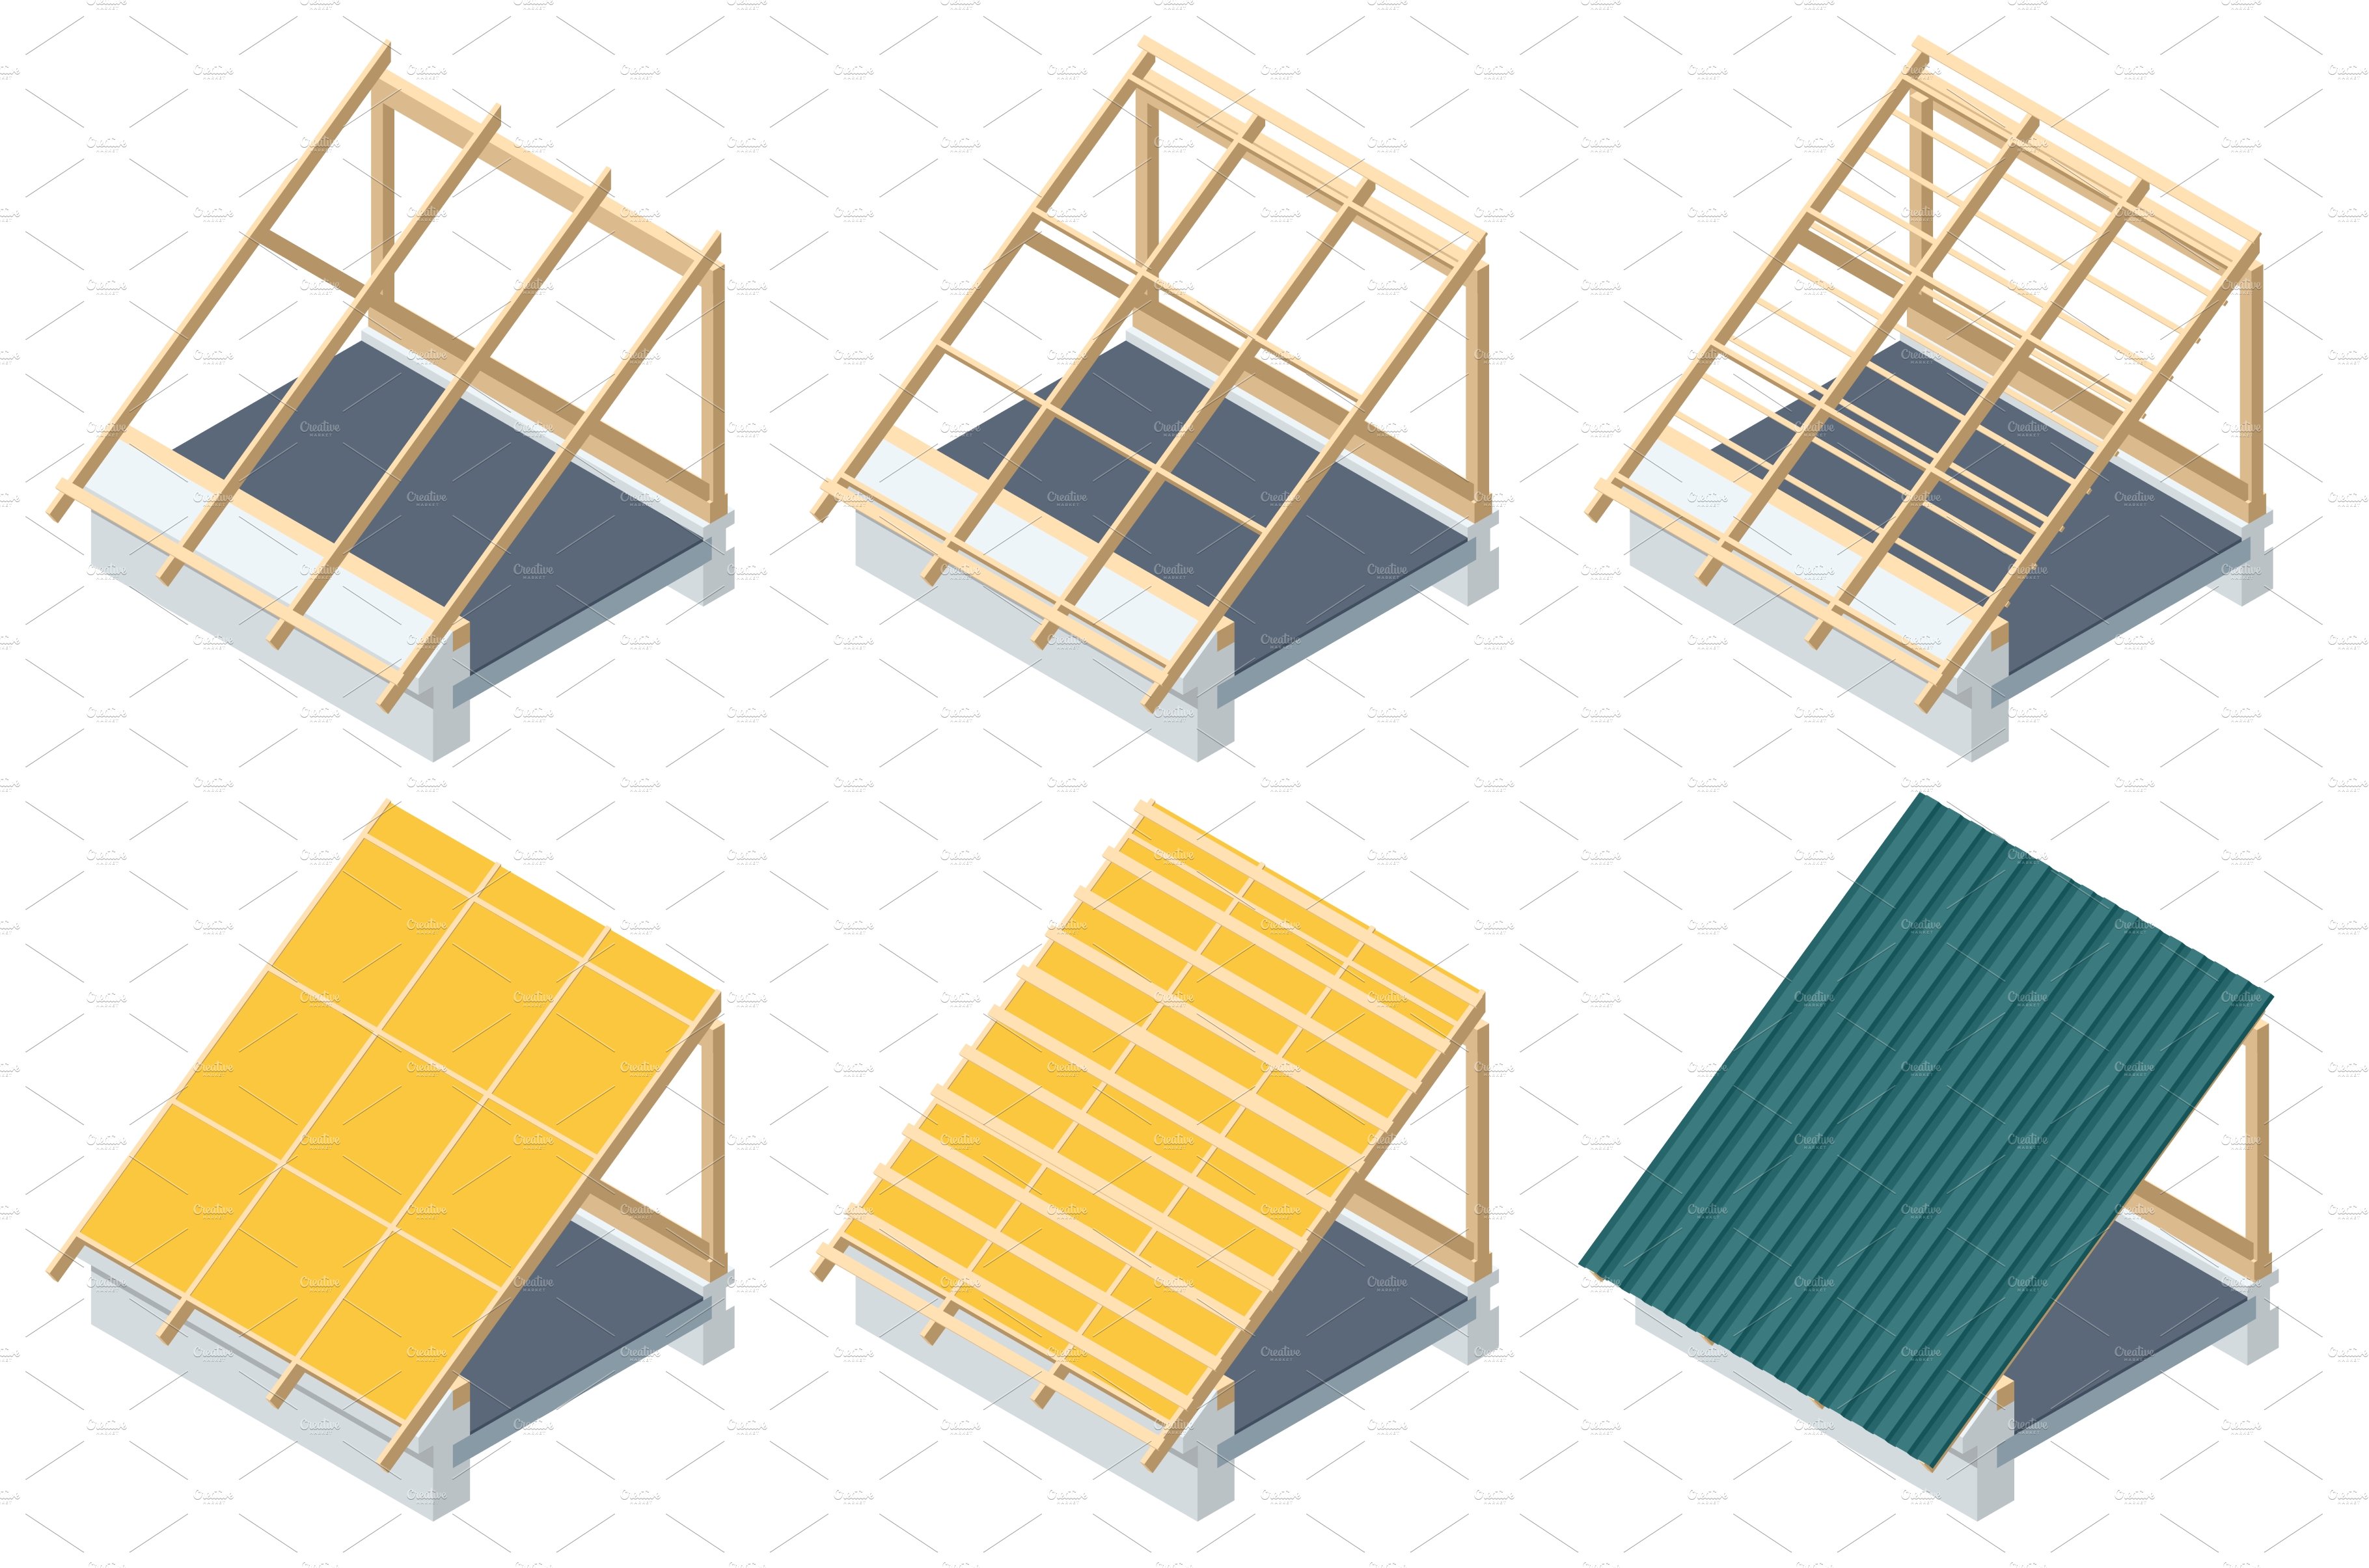 Isometric roofing construction cover image.